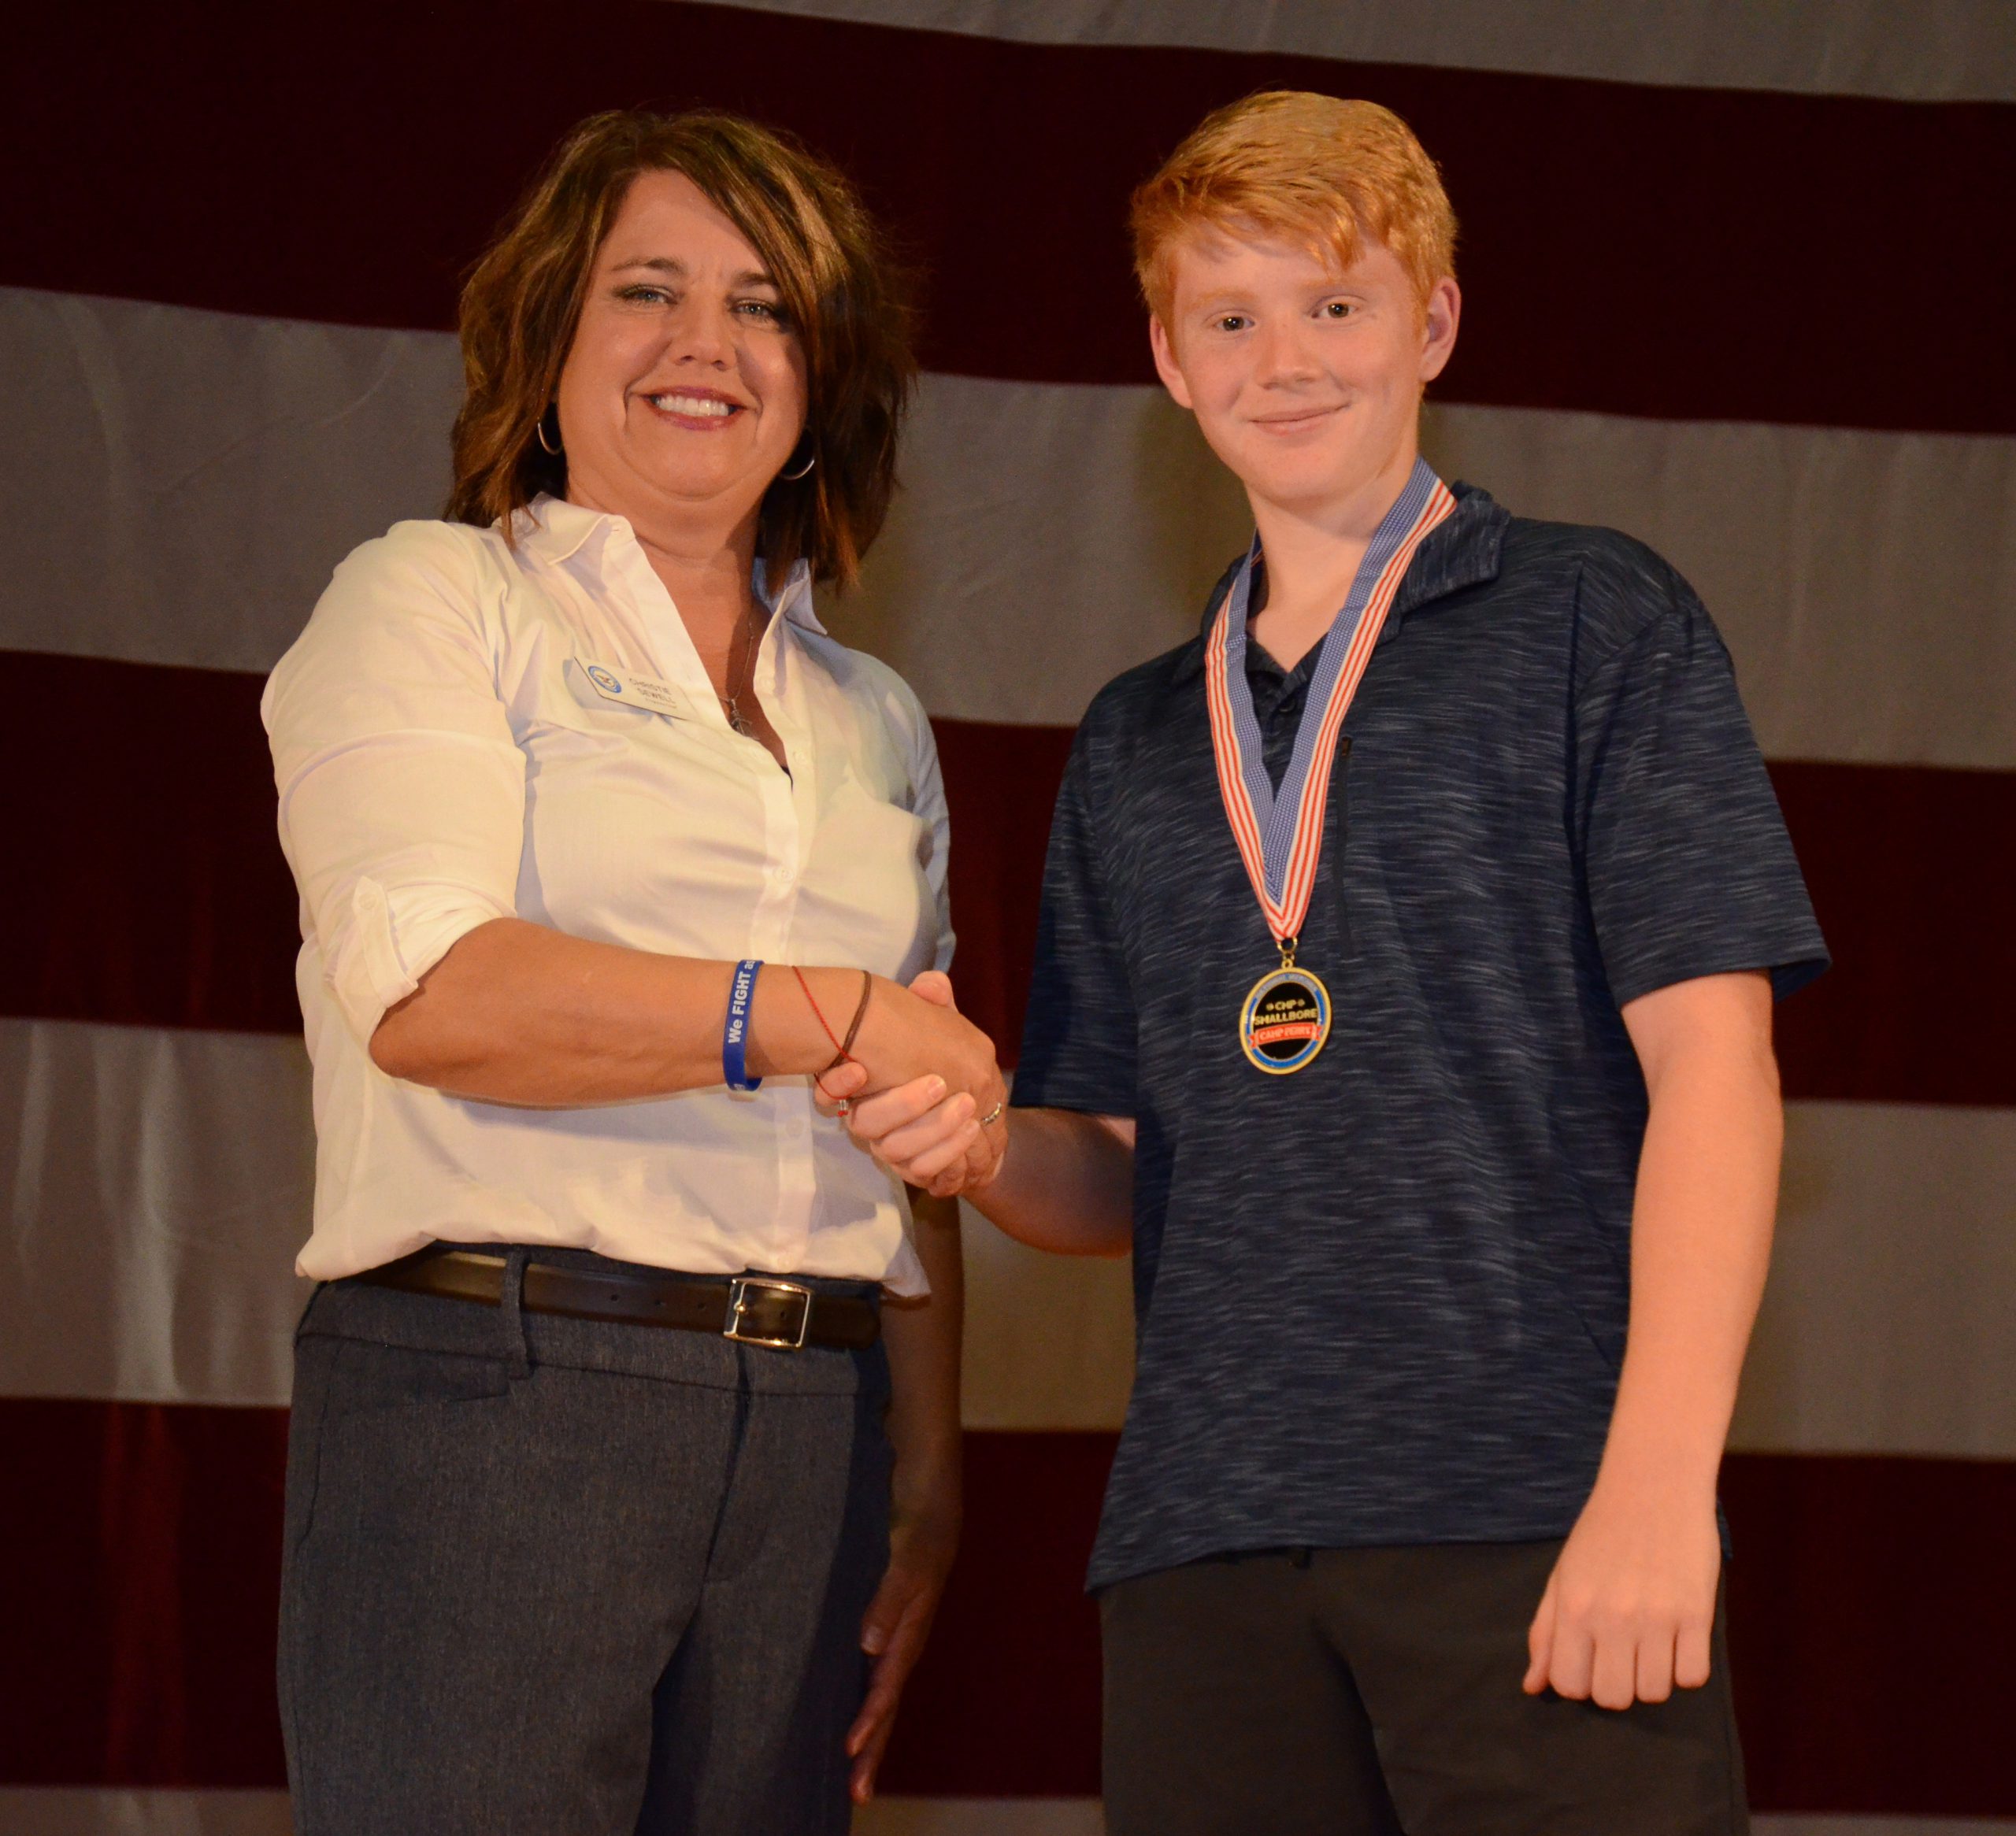 In 2019, Scott earned second in the CMP’s Junior 3P Smallbore National event at Camp Perry (shown with CMP programs chief, Christie Sewell).